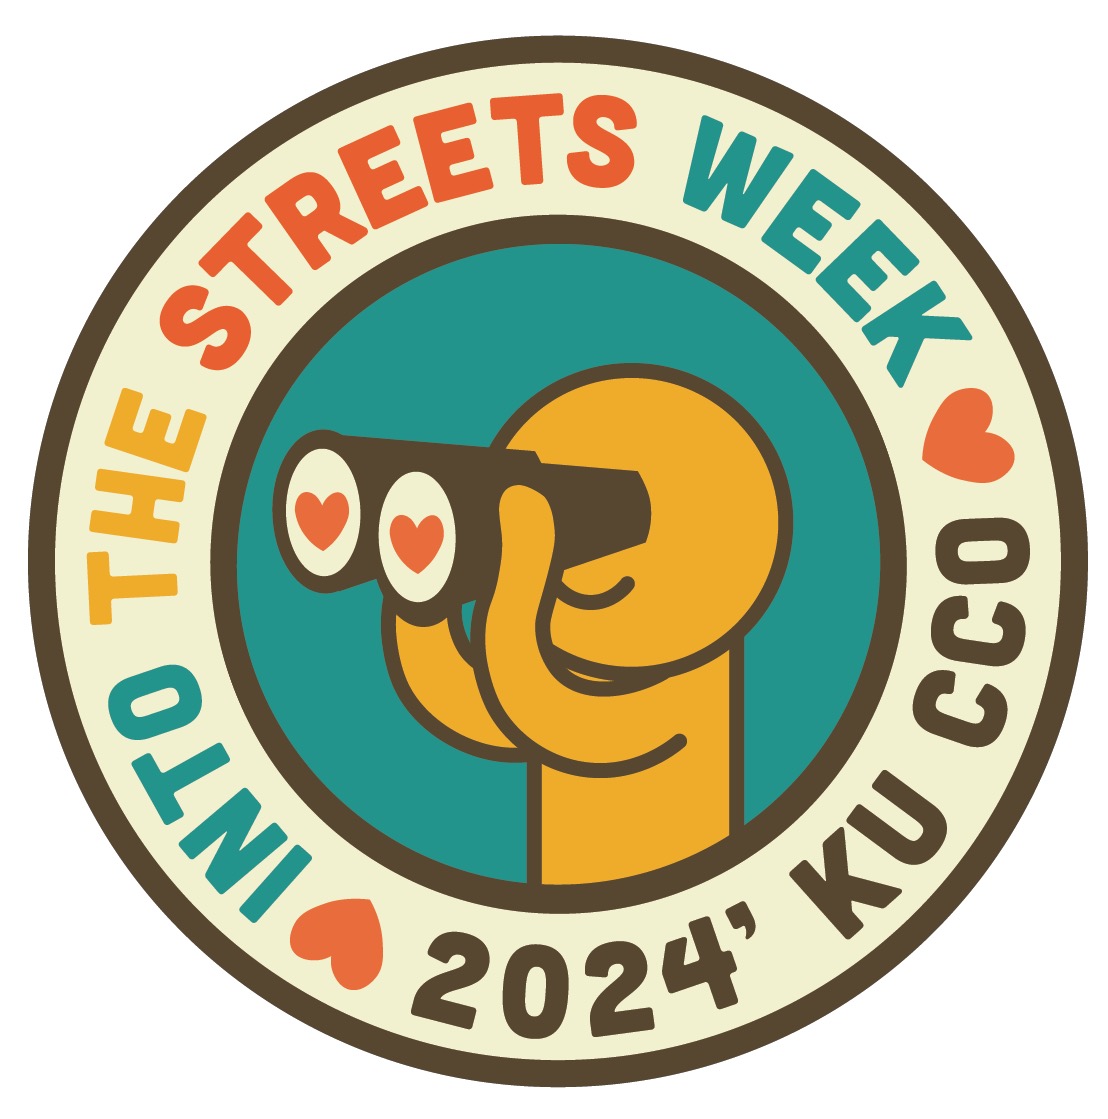 "Into the Streets Week Logo"